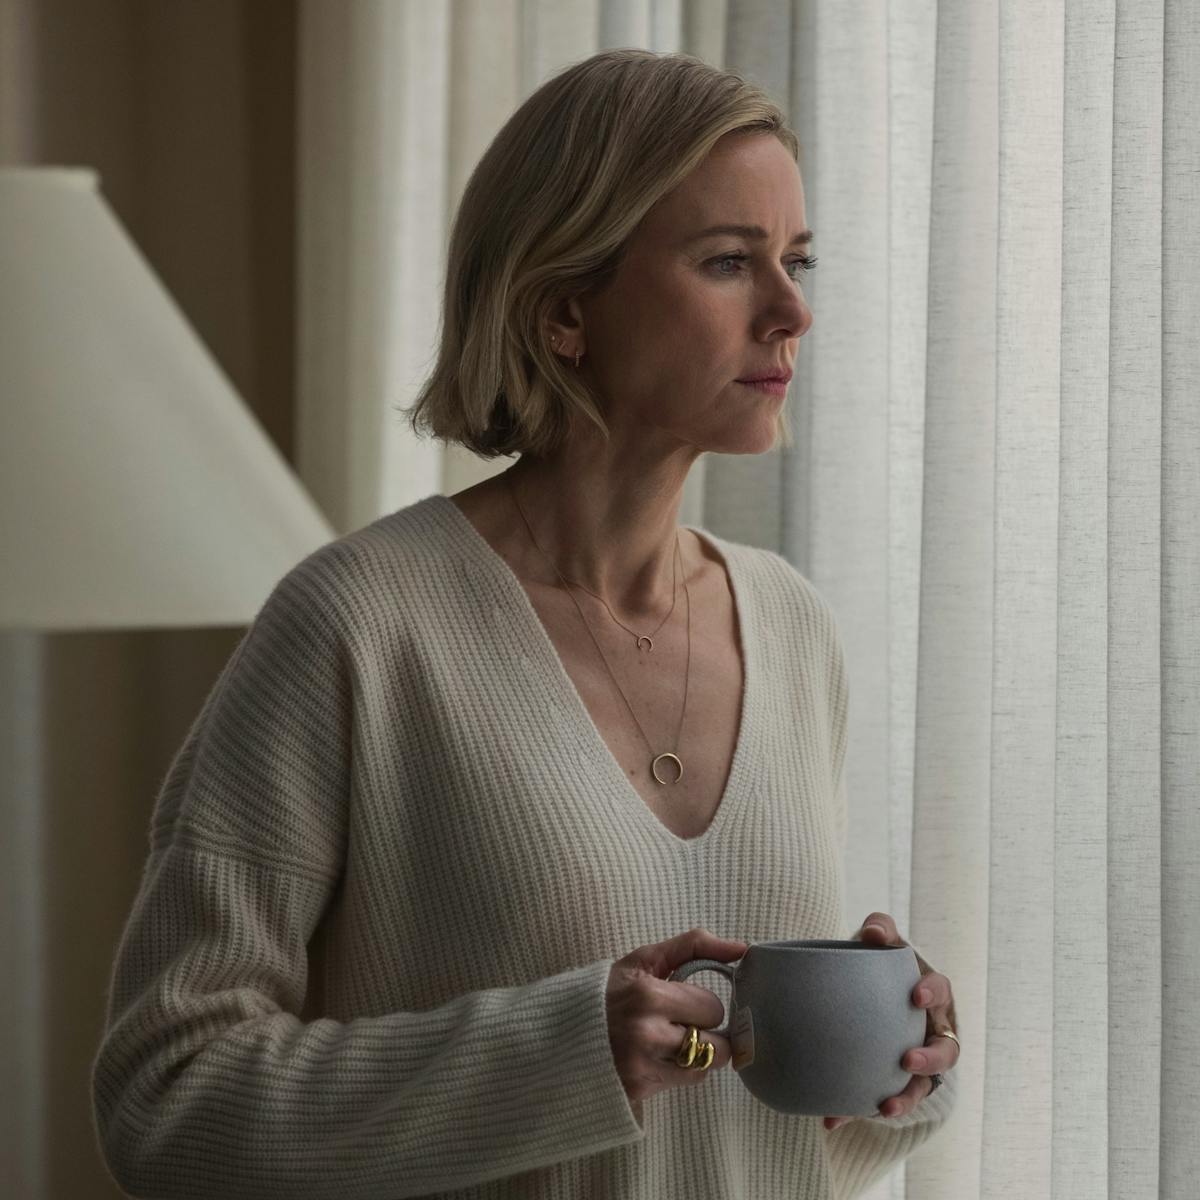 Nora Brannock (Naomi Watts) wears a beige sweater in her beige house and looks out the window, holding a mug.